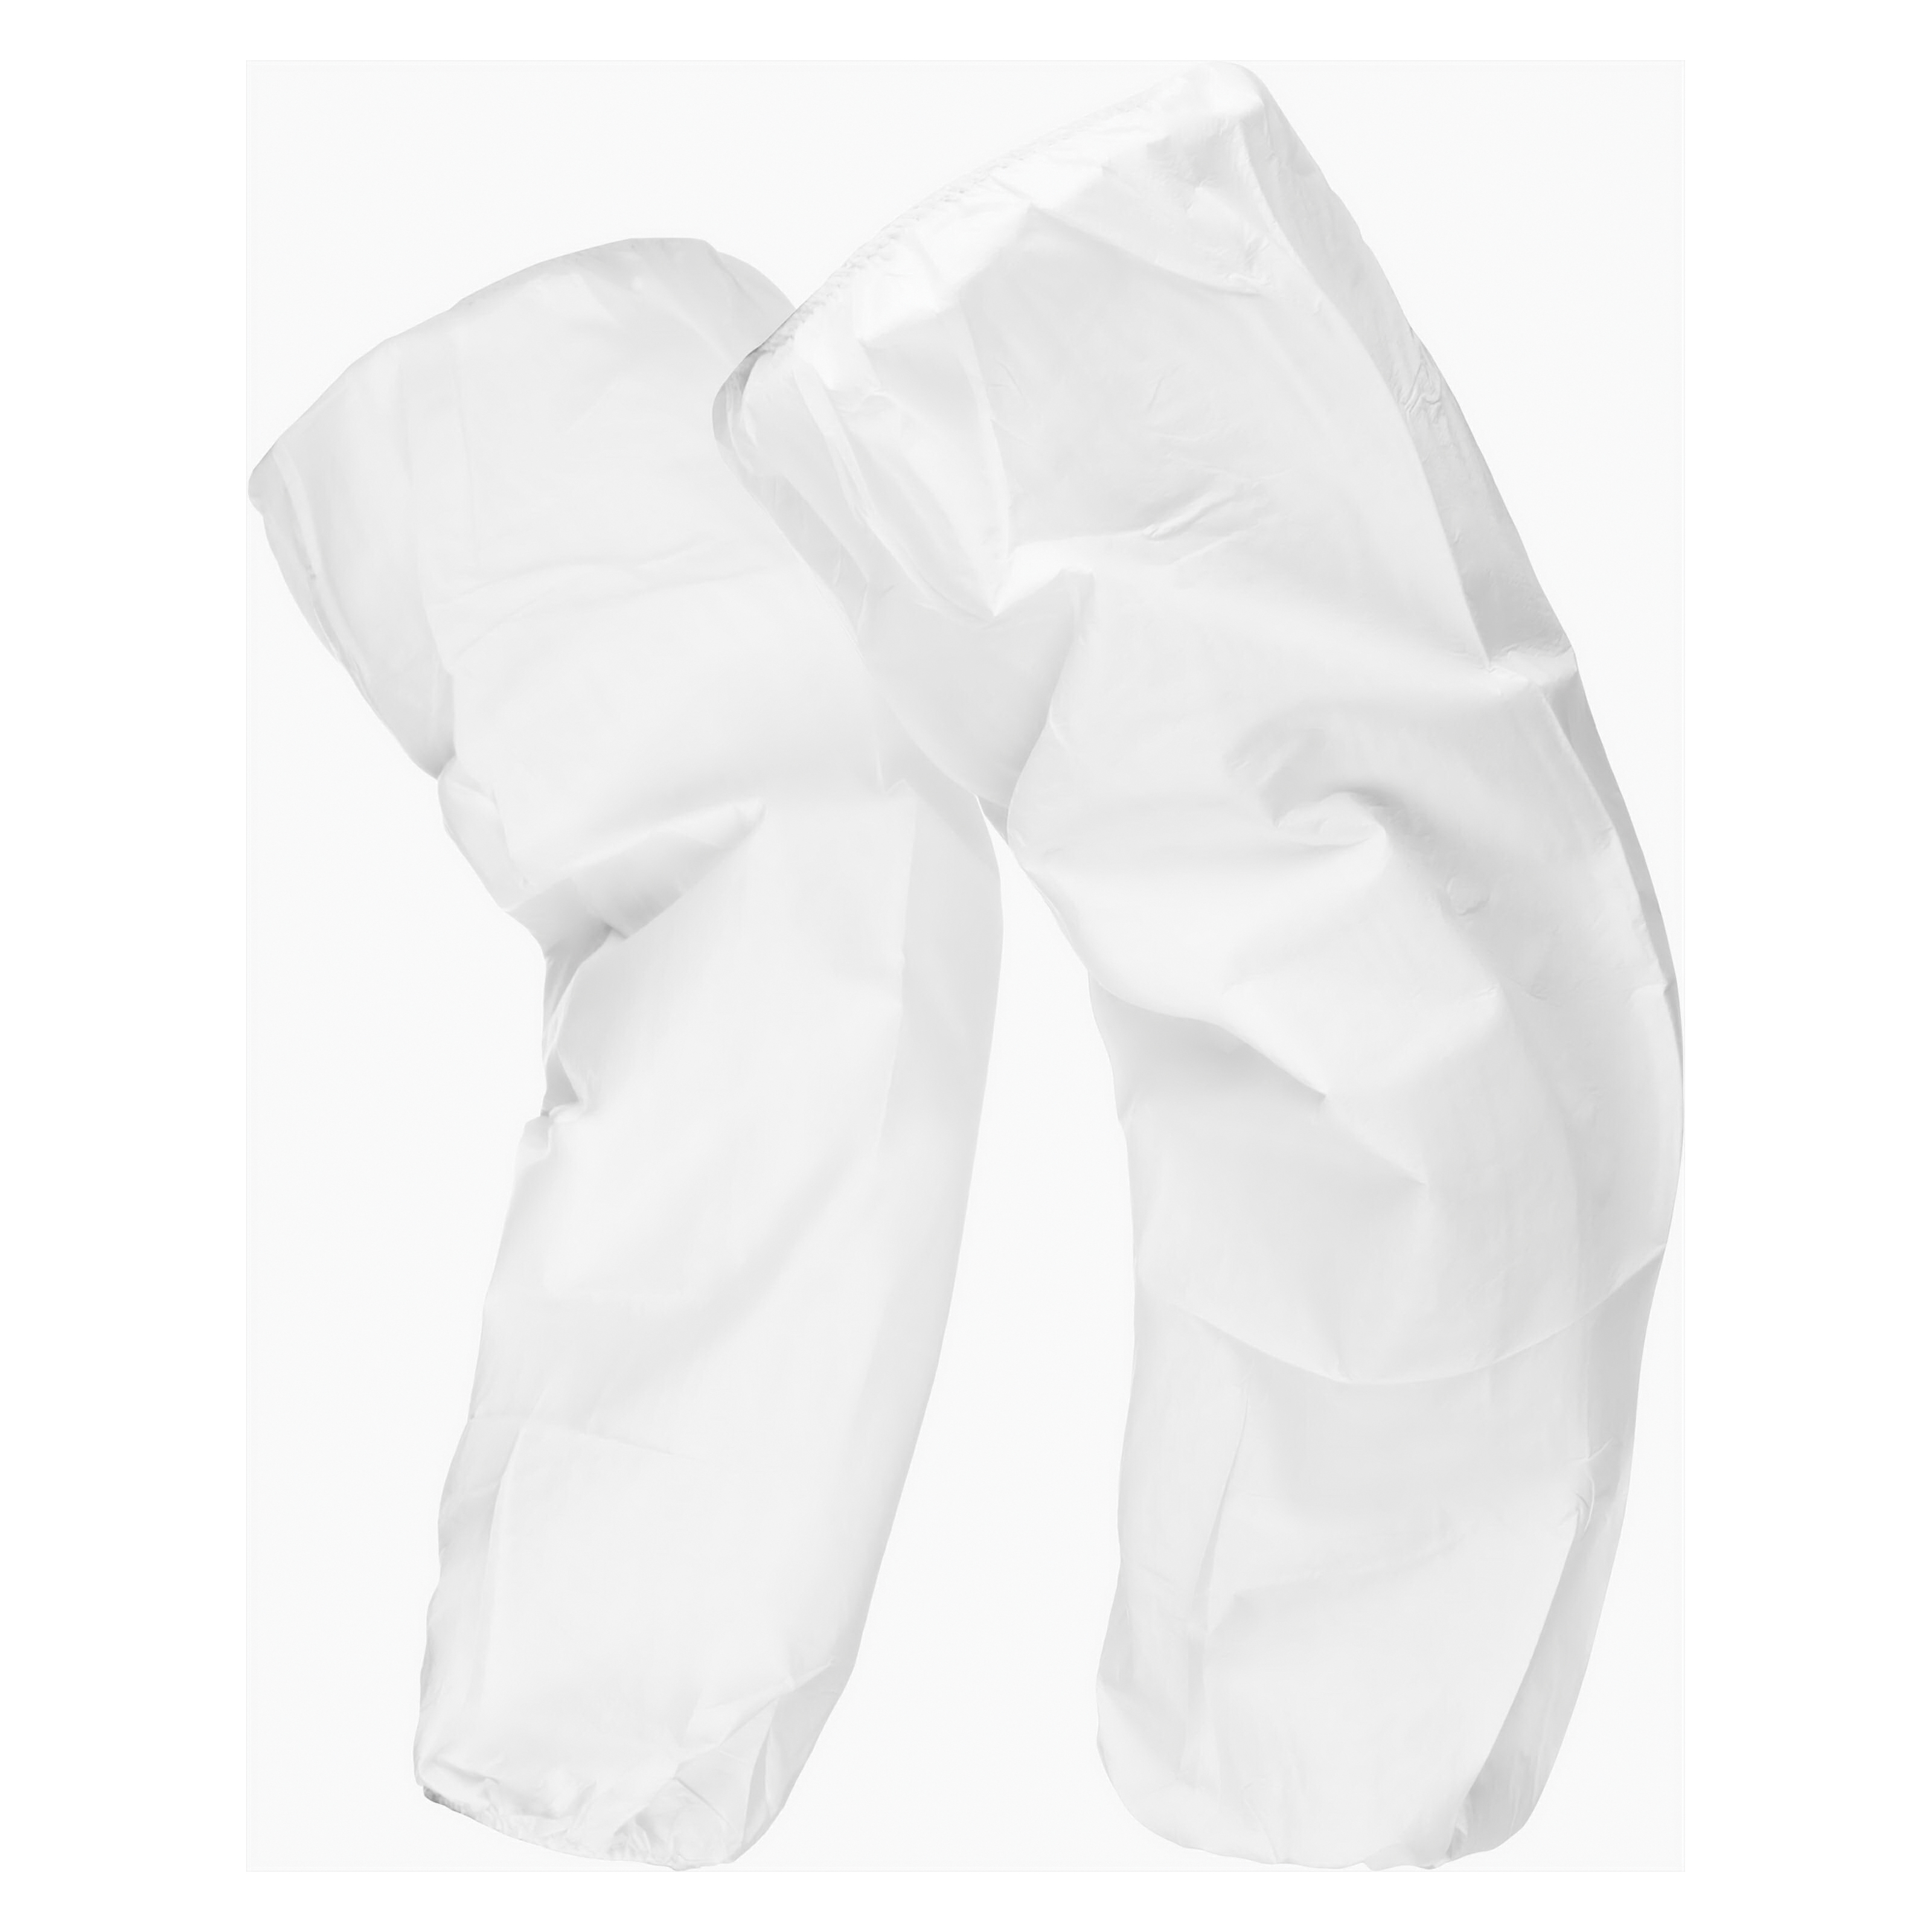 Lakeland® COL412-2X Disposable Coverall, 2XL, White, MicroMax® NS Cool Suit, 52 to 54 in Chest, 29 in L Inseam